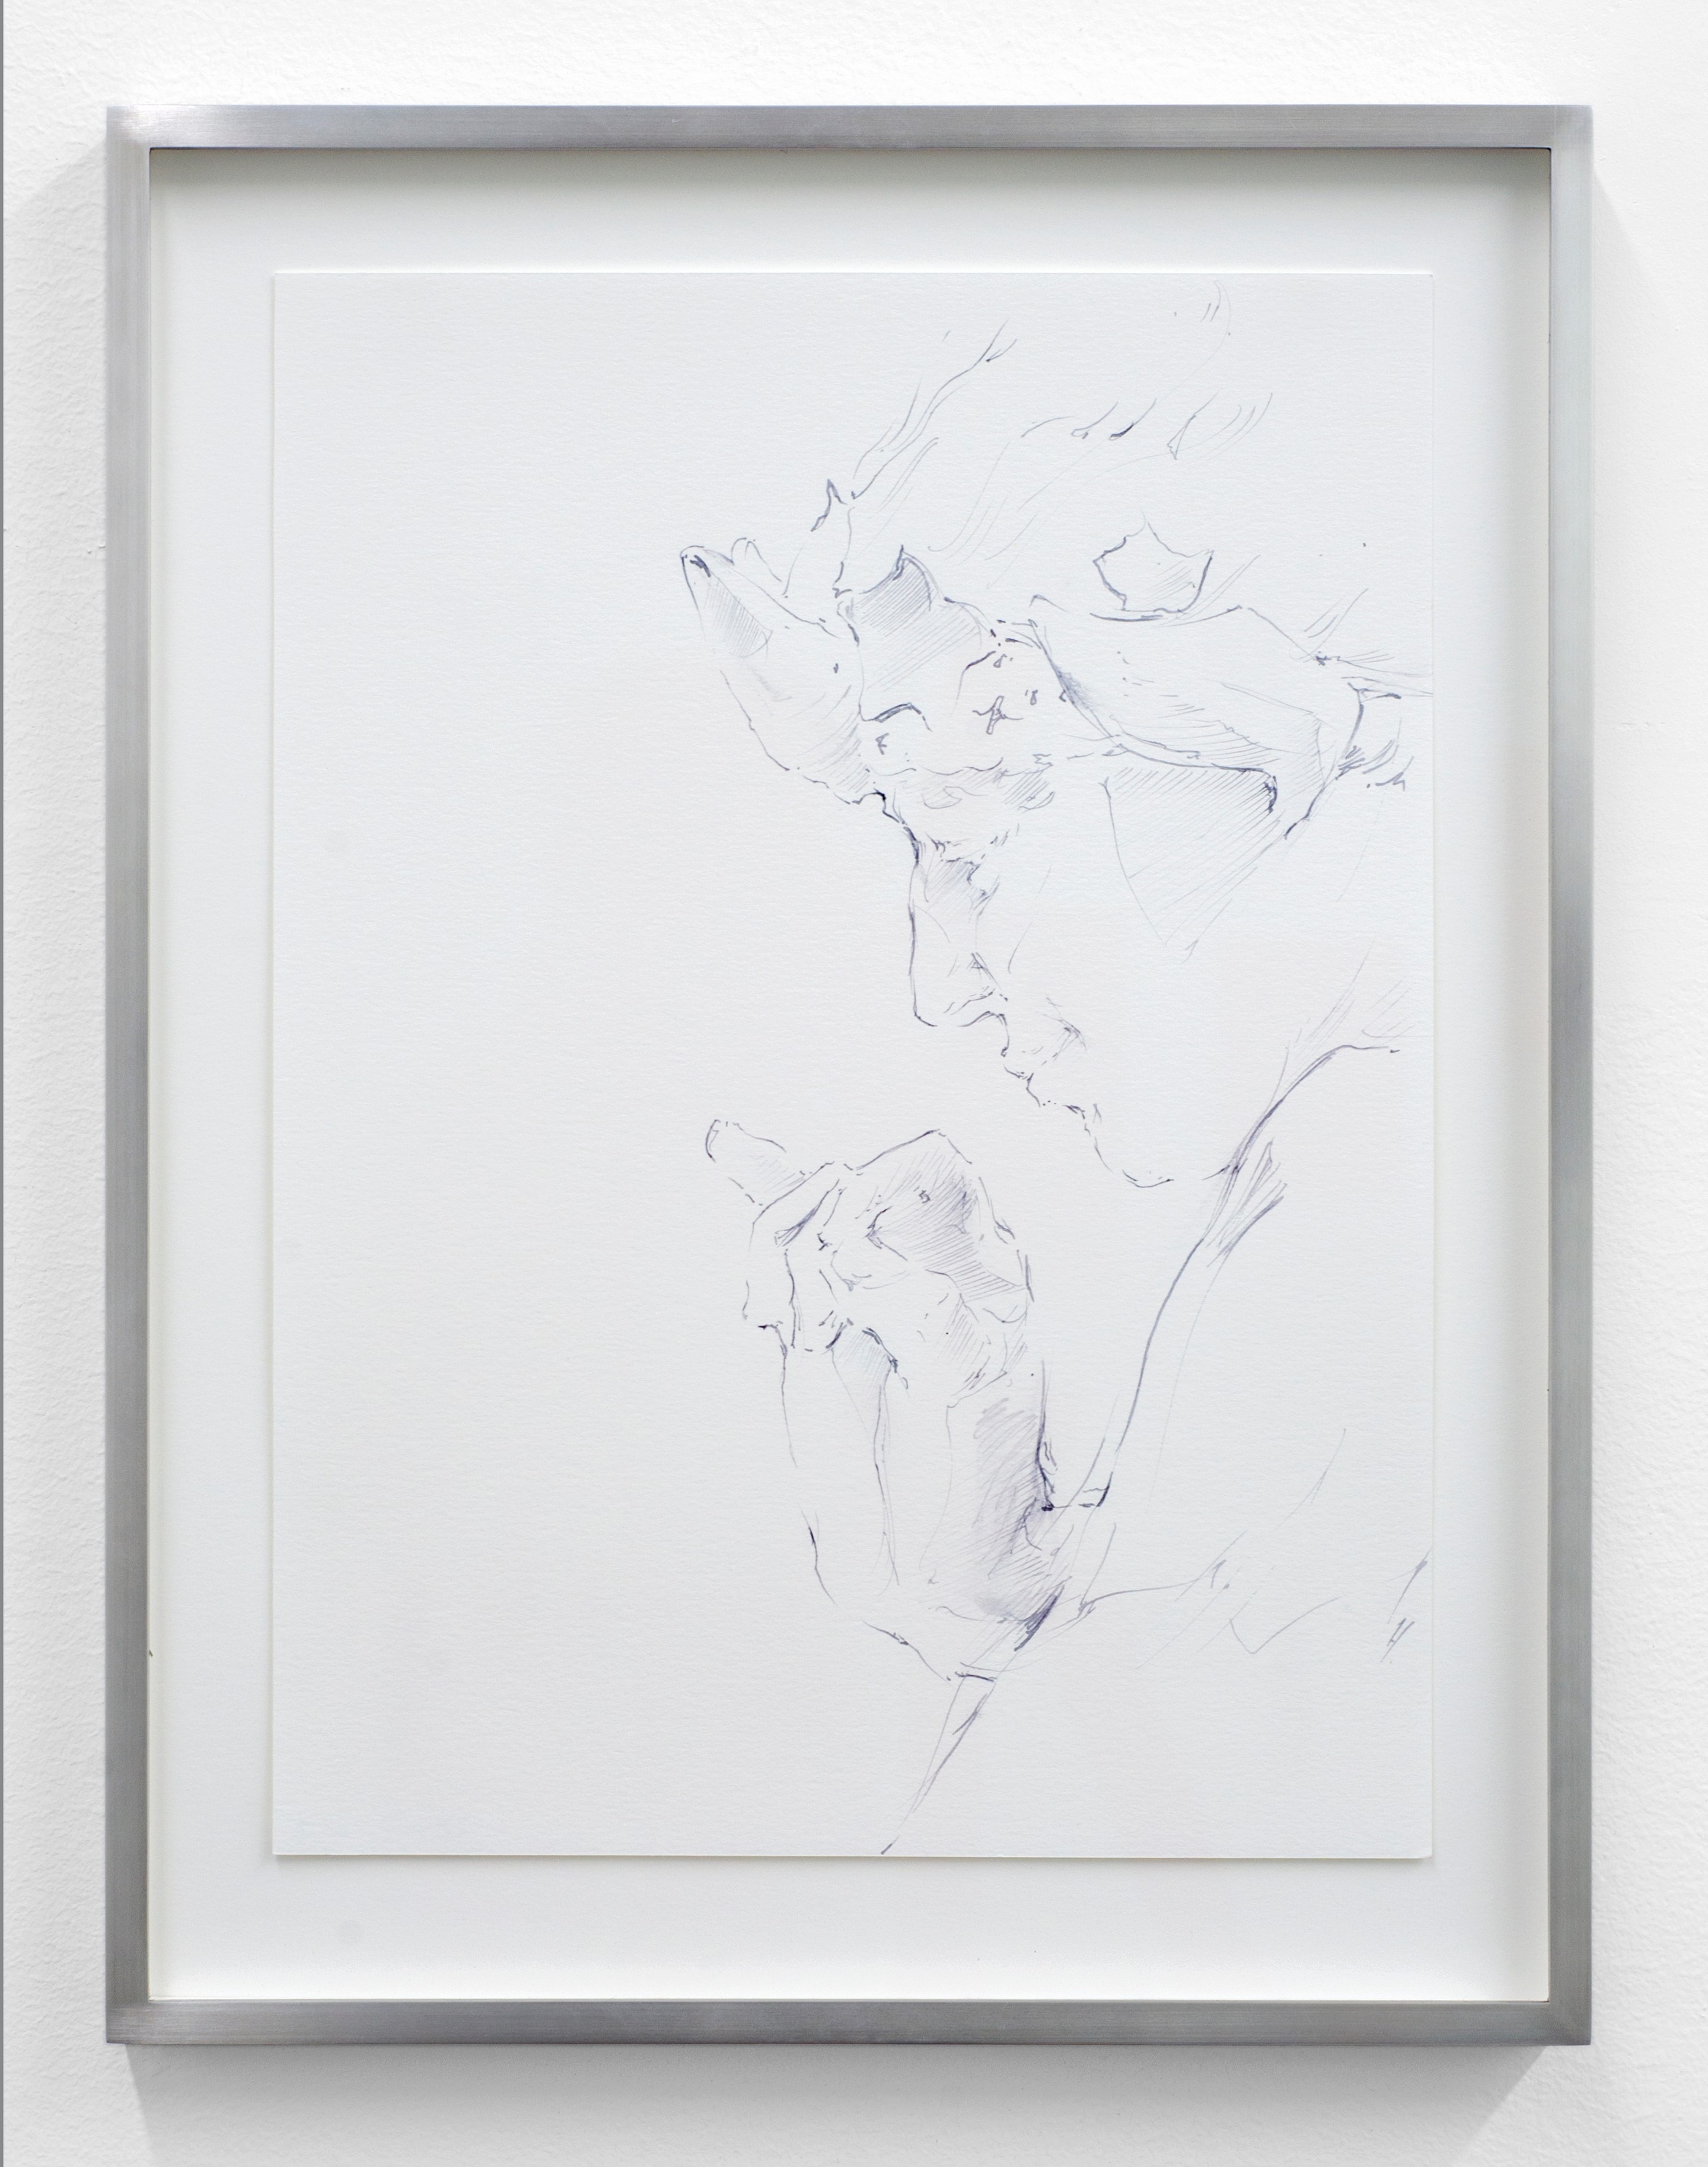 Untitled (Pan with Bear Cubs 1) (2019)
Ink on paper. 14.4 x 11 in (36.5 x 28 cm) Framed